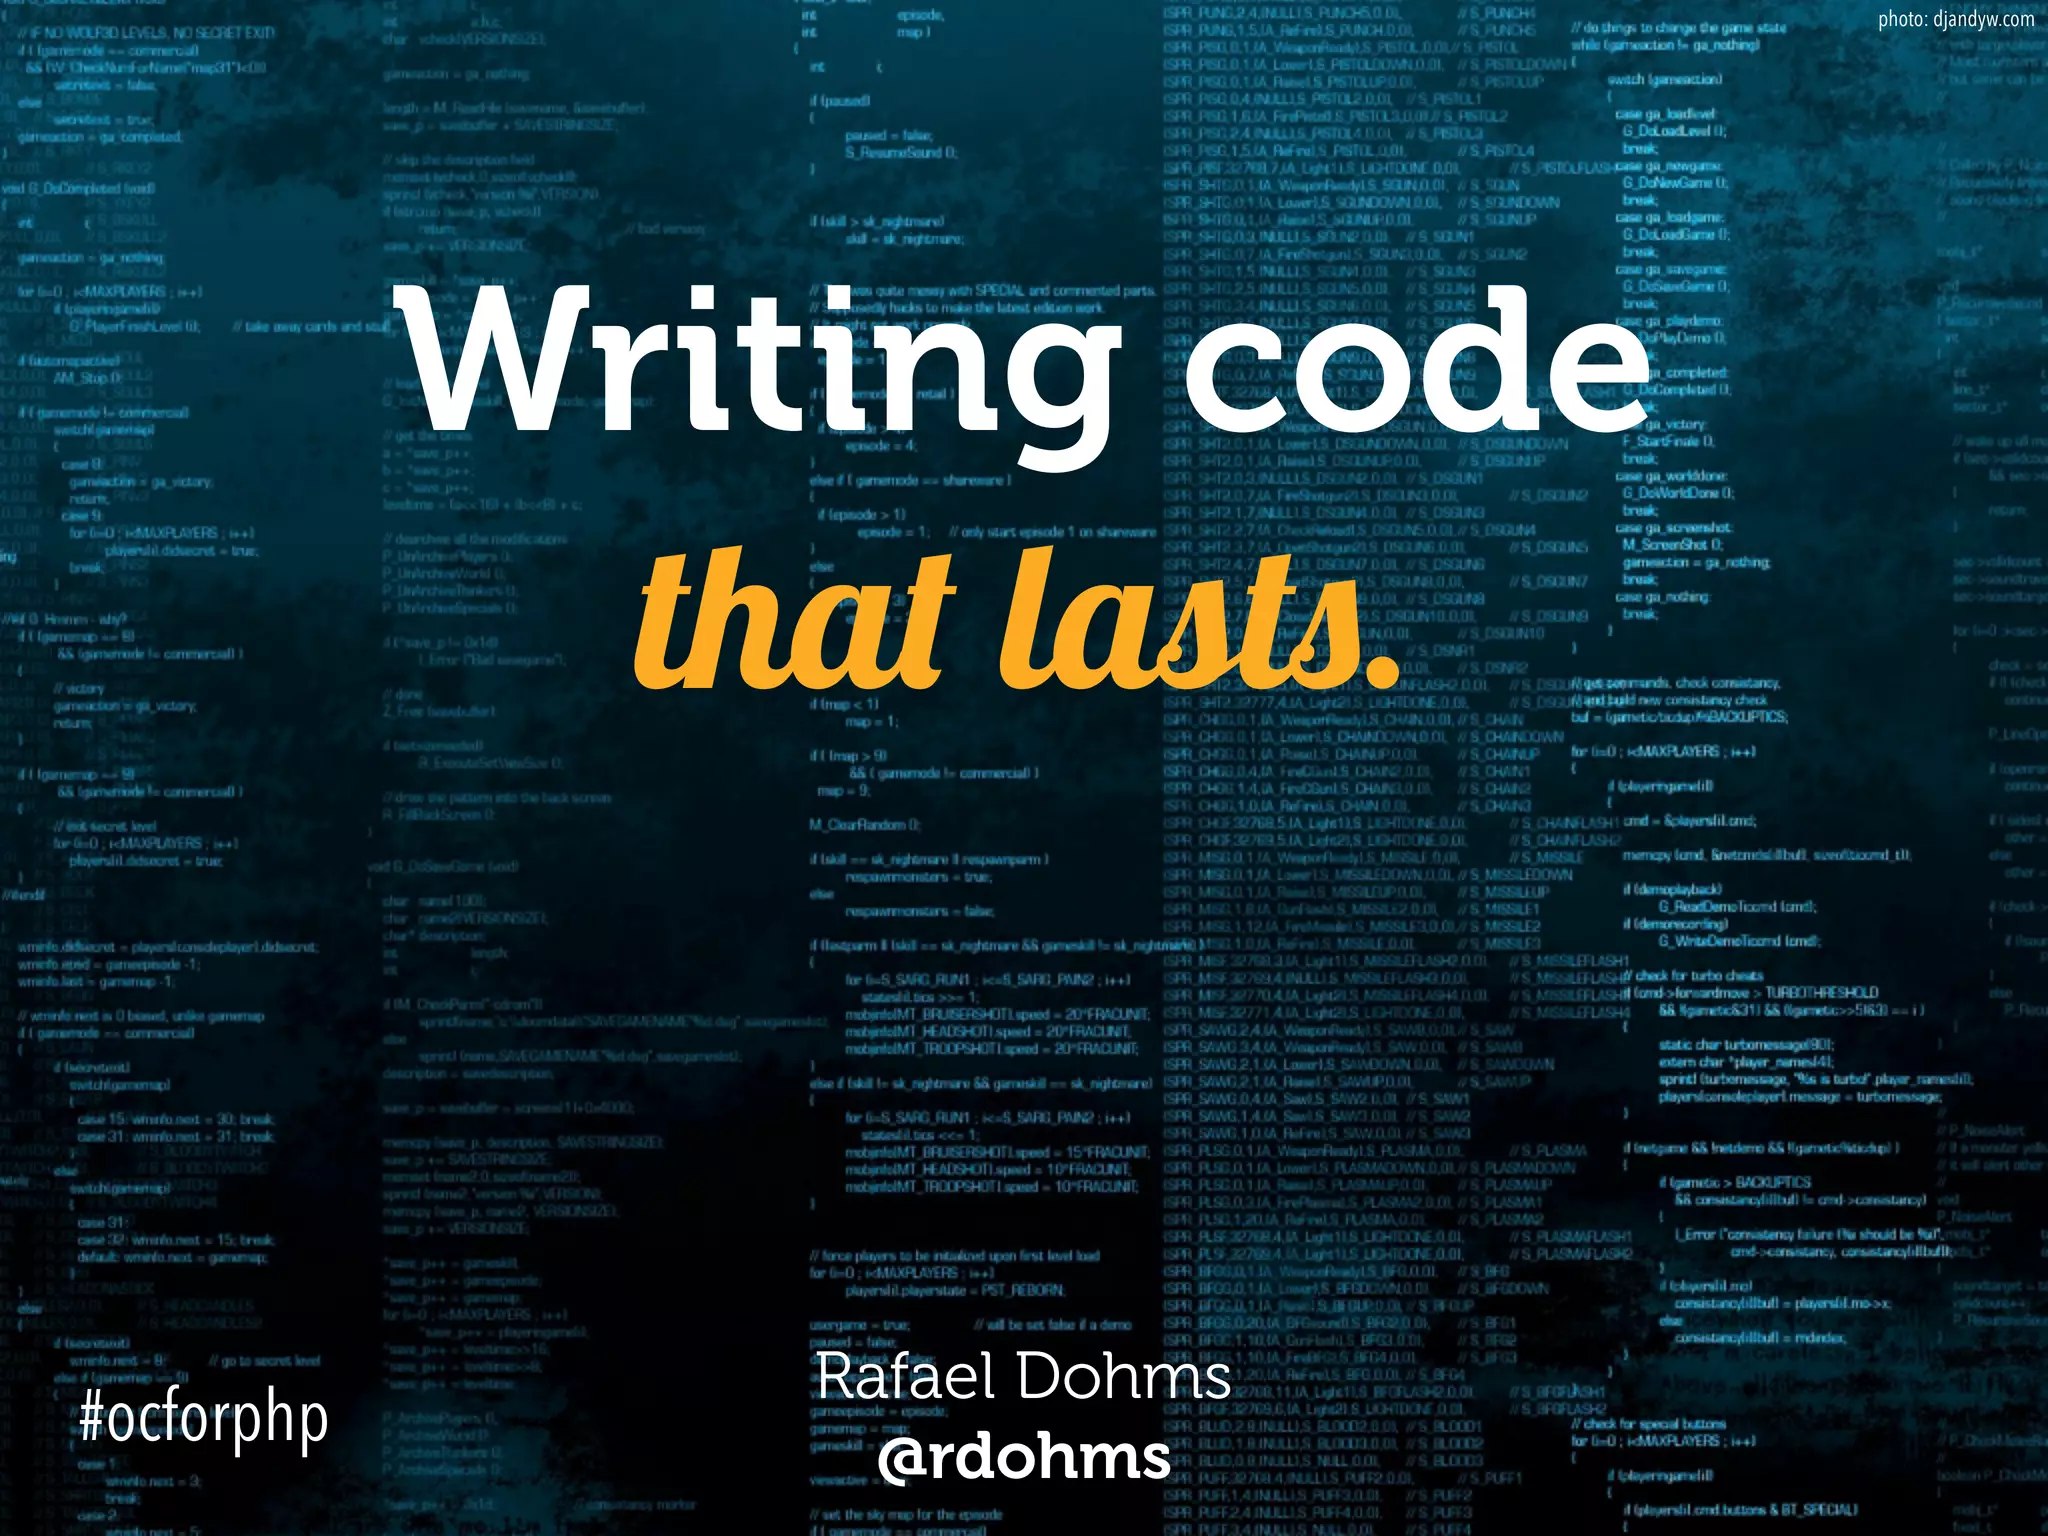 Writing code that lasts